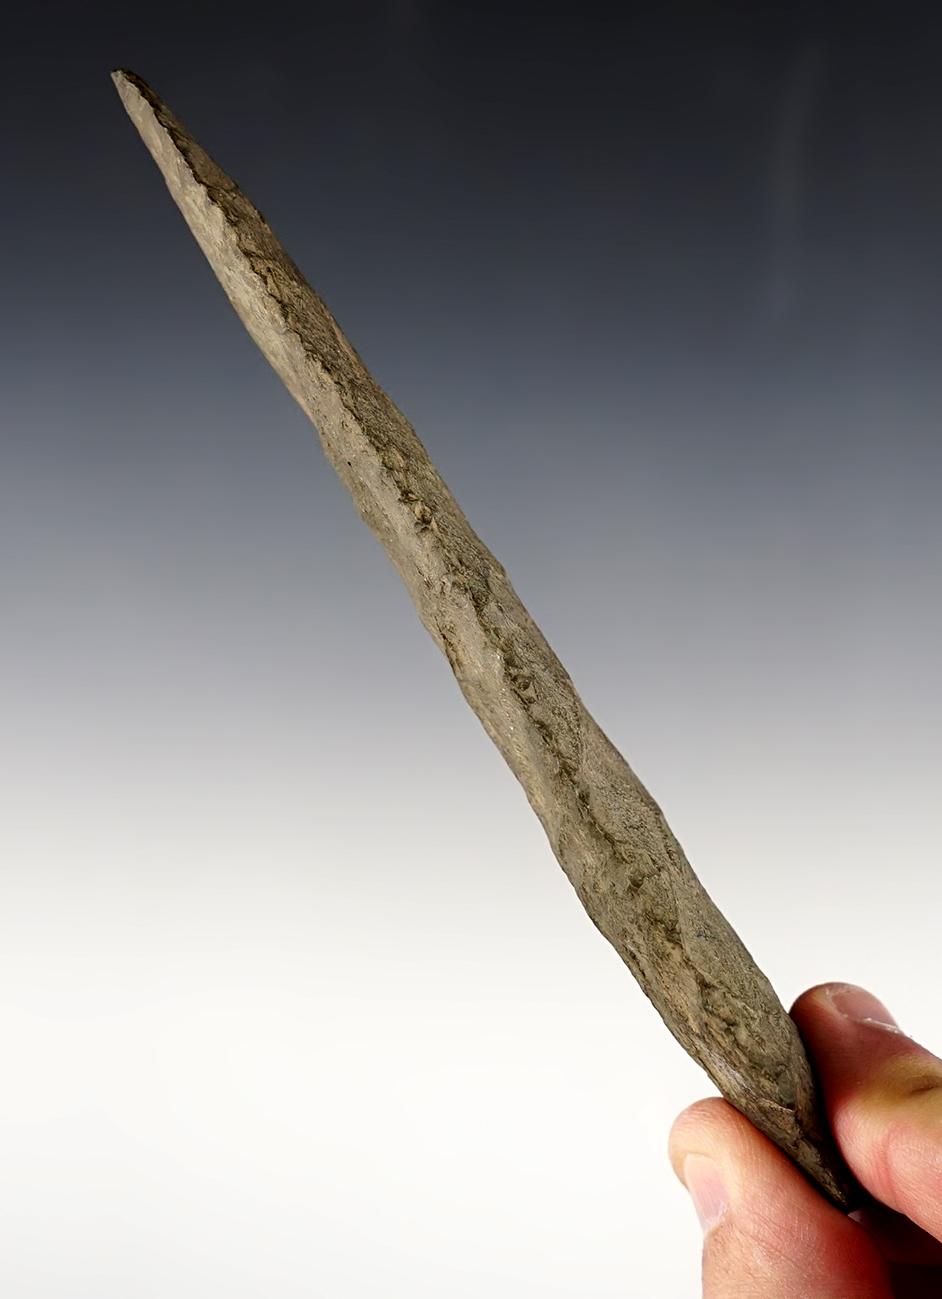 Heavily patinated 5 3/4" Stemmed Lanceolate made from dark grey Flint. Northeastern Indiana.